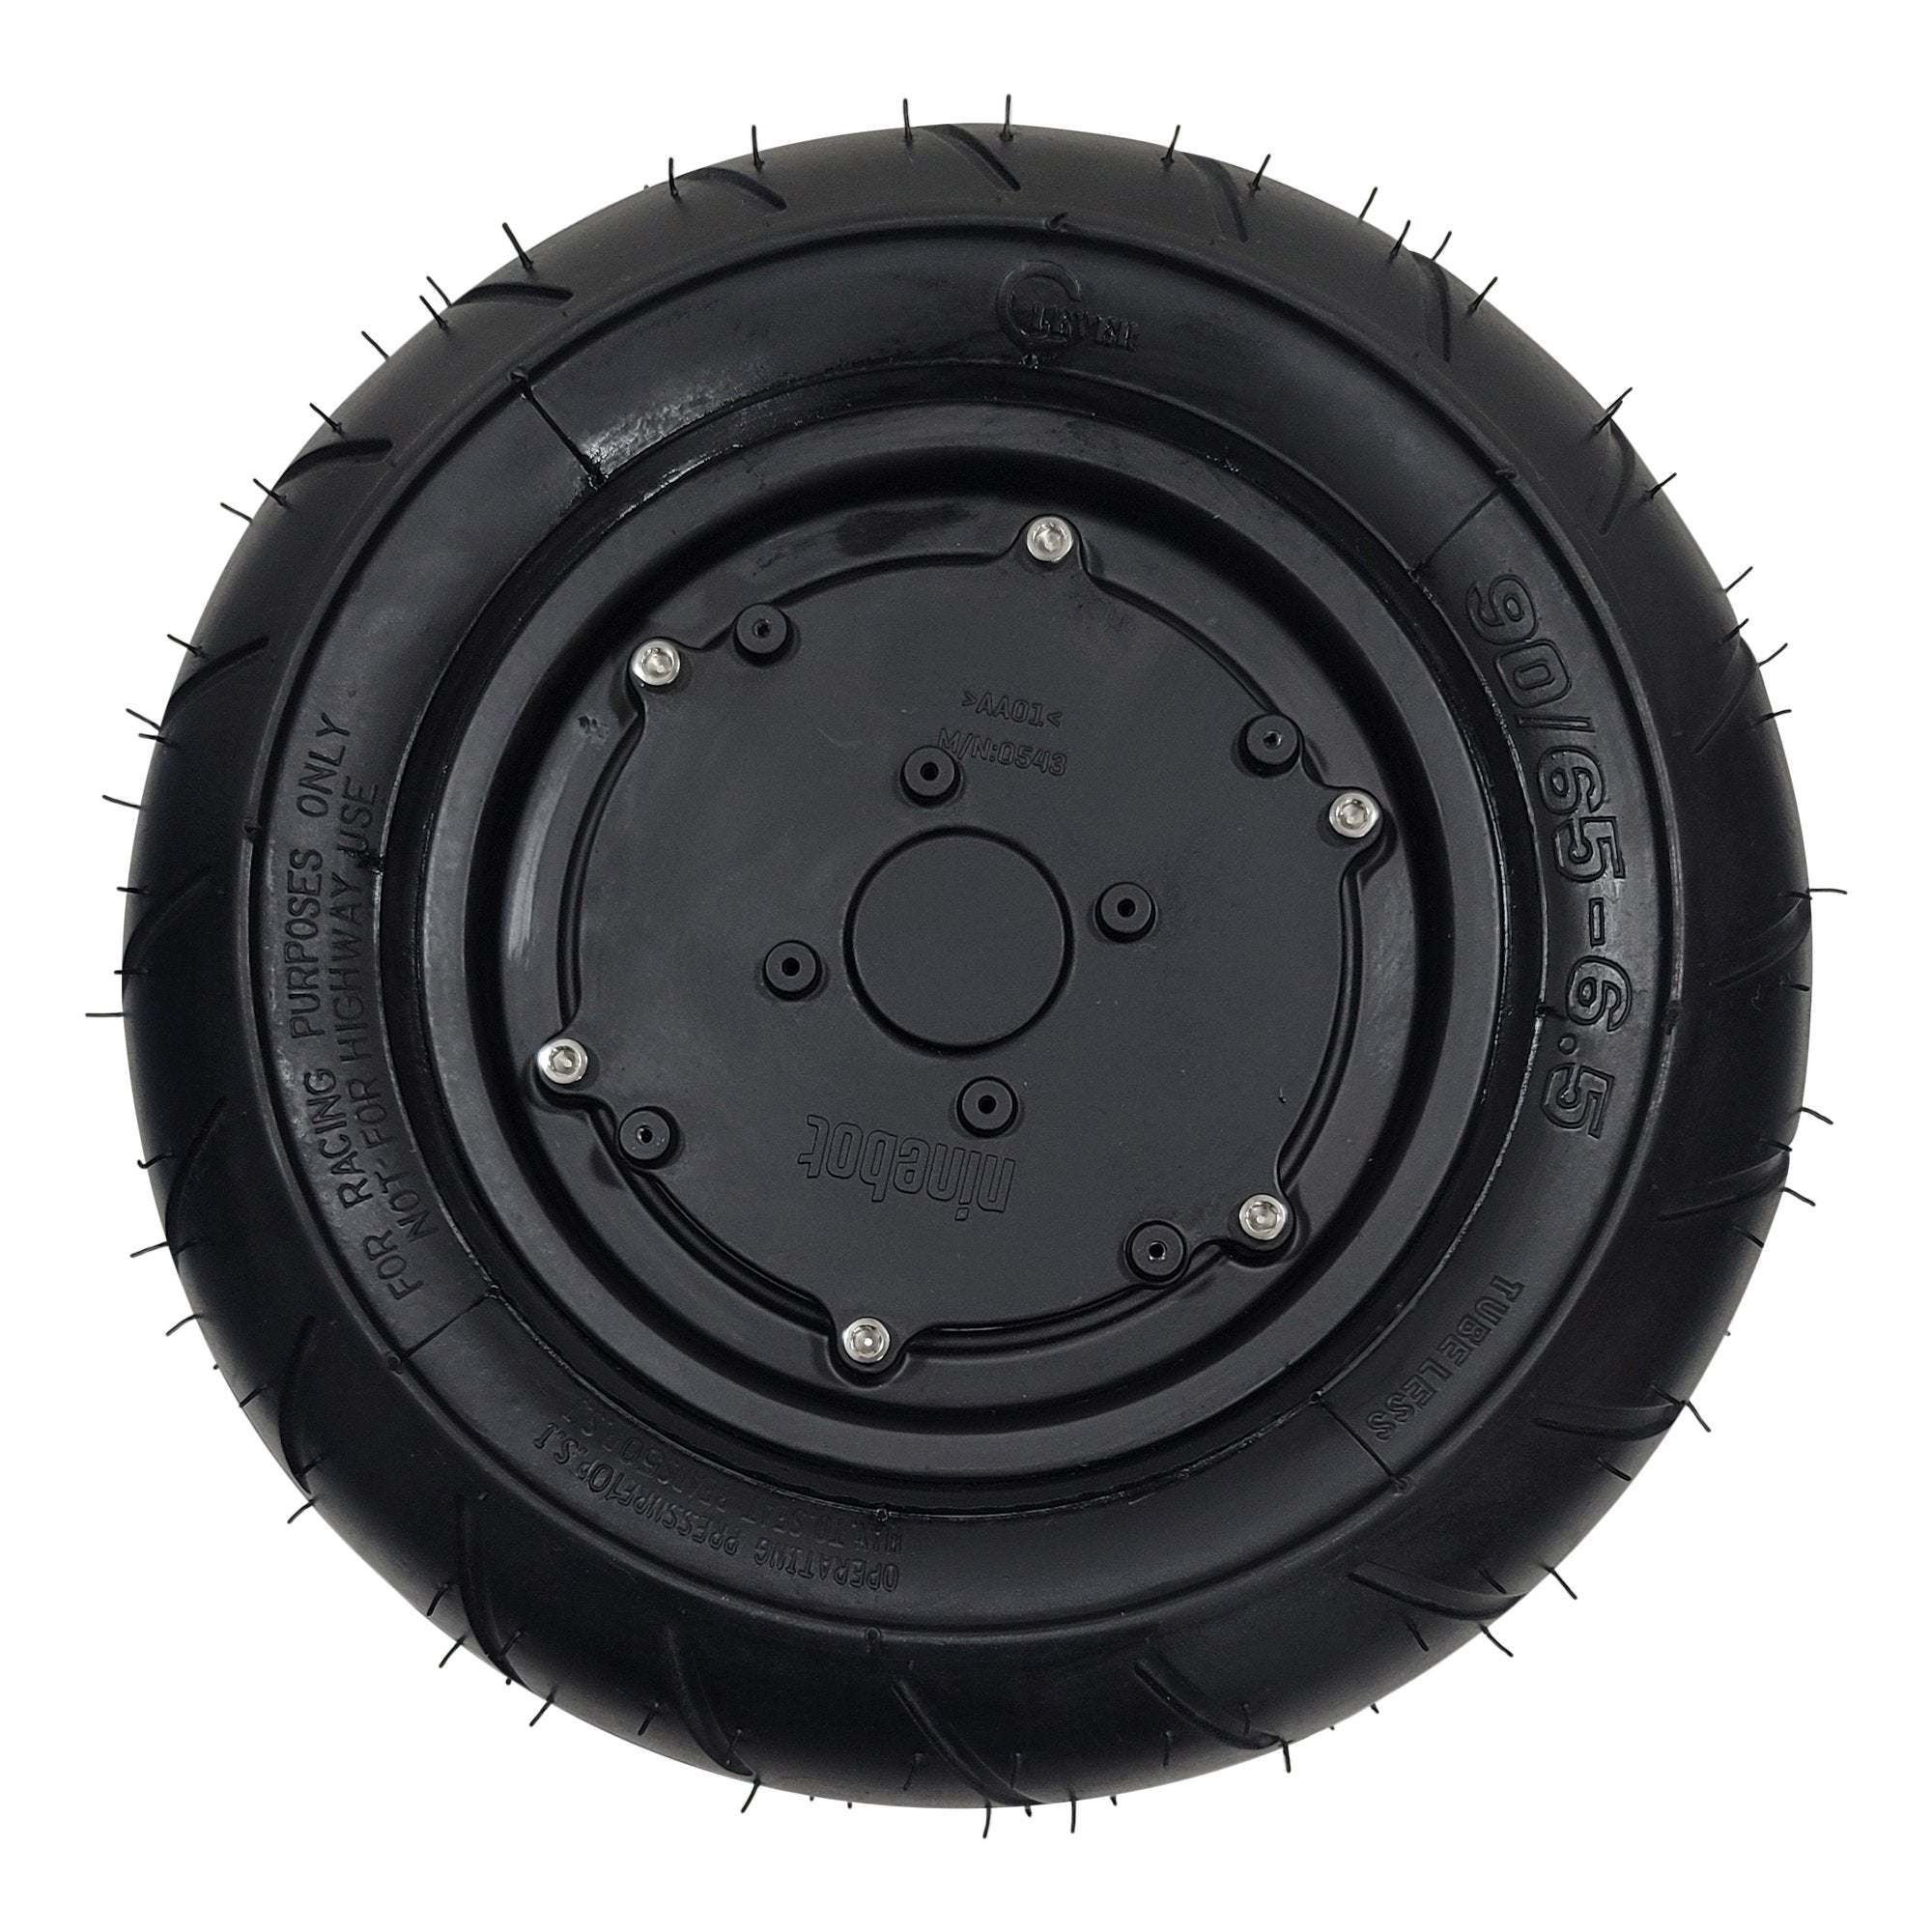 Spare Part - Motor With Fatboy Tire For Segway MiniPRO And Segway MiniLITE